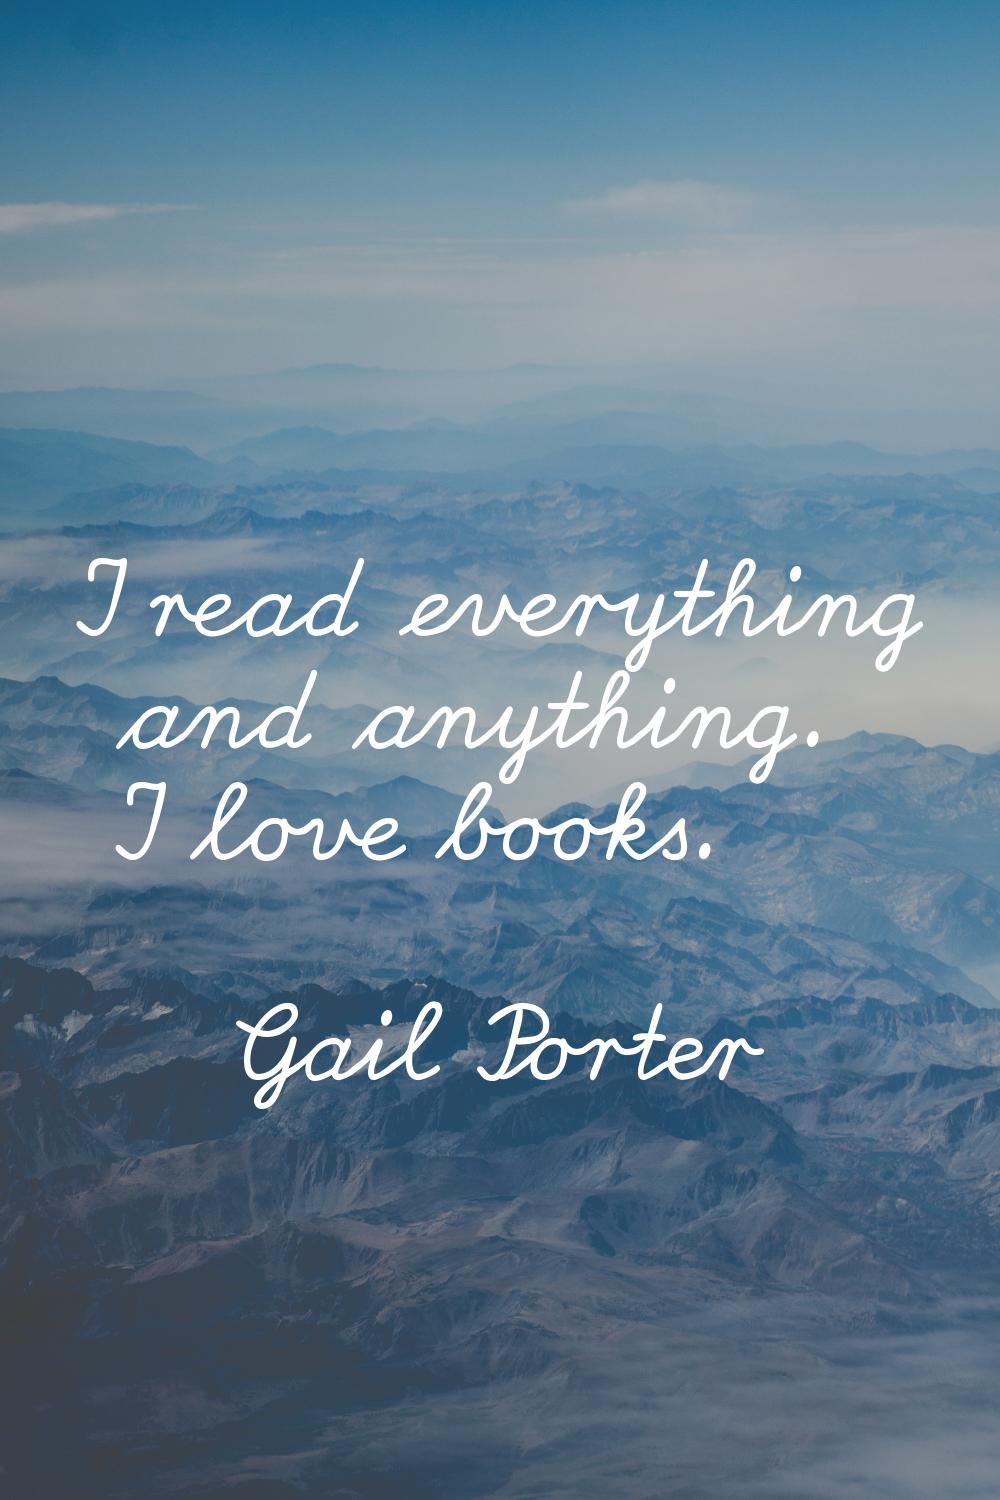 I read everything and anything. I love books.